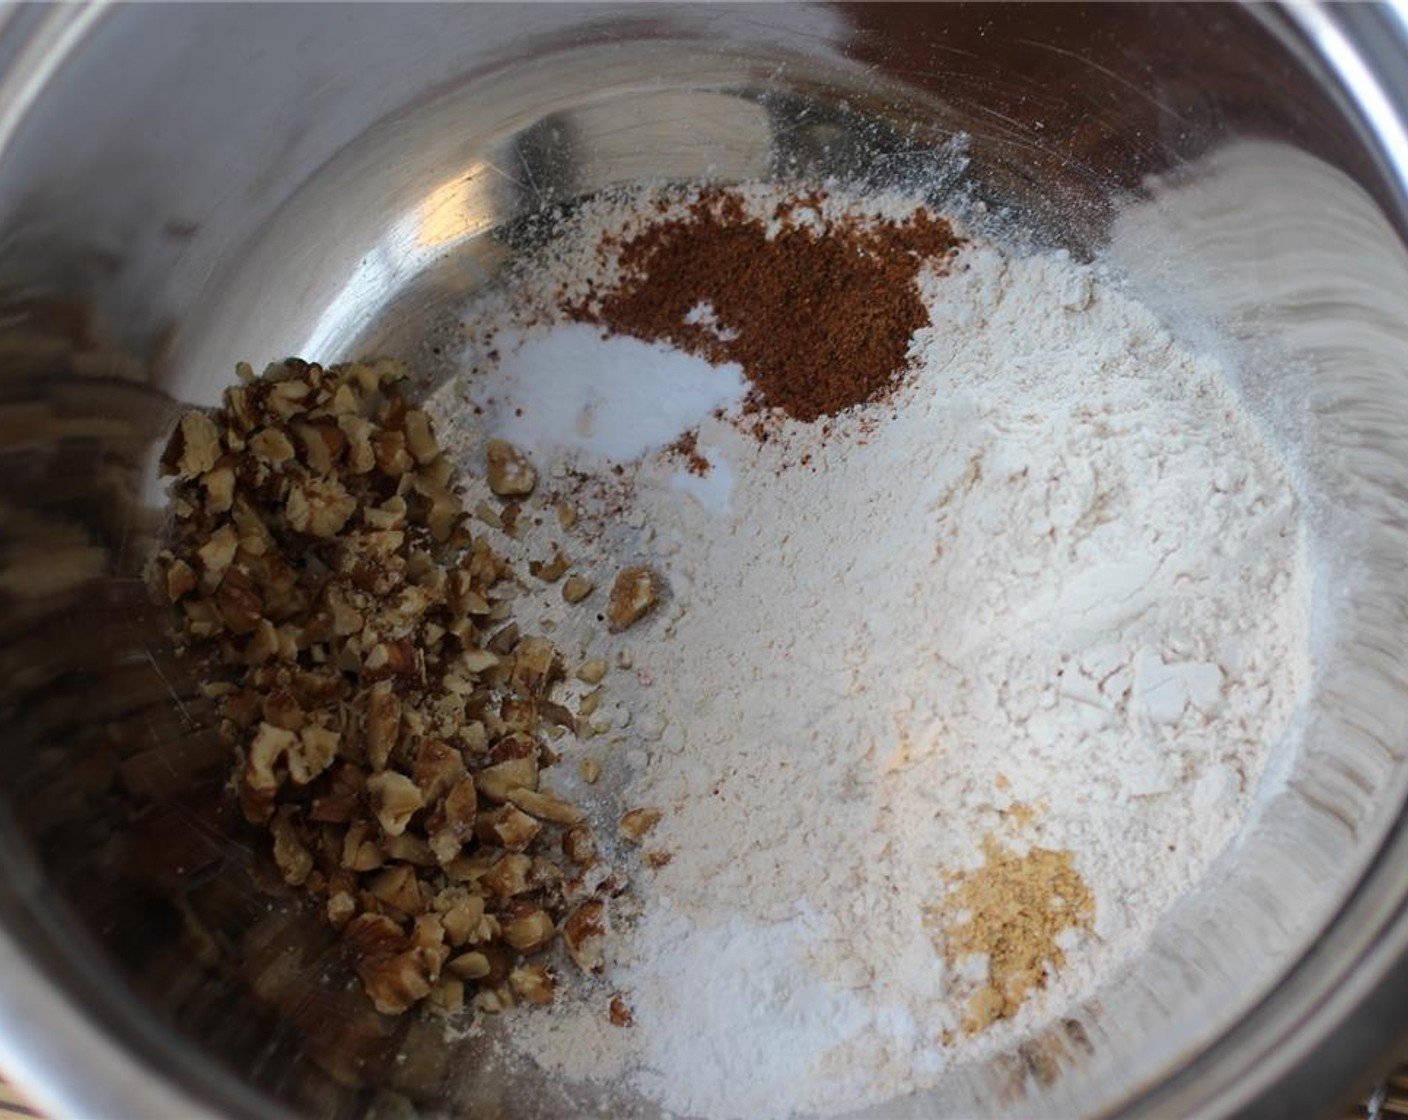 step 2 For the dry ingredients, add the Whole Wheat Pastry Flour (1 cup), Baking Powder (1 tsp), Baking Soda (1/2 tsp), Salt (1 pinch), Ground Nutmeg (1 tsp), Ground Ginger (1/8 tsp), and Walnut (1/4 cup) and mix together.